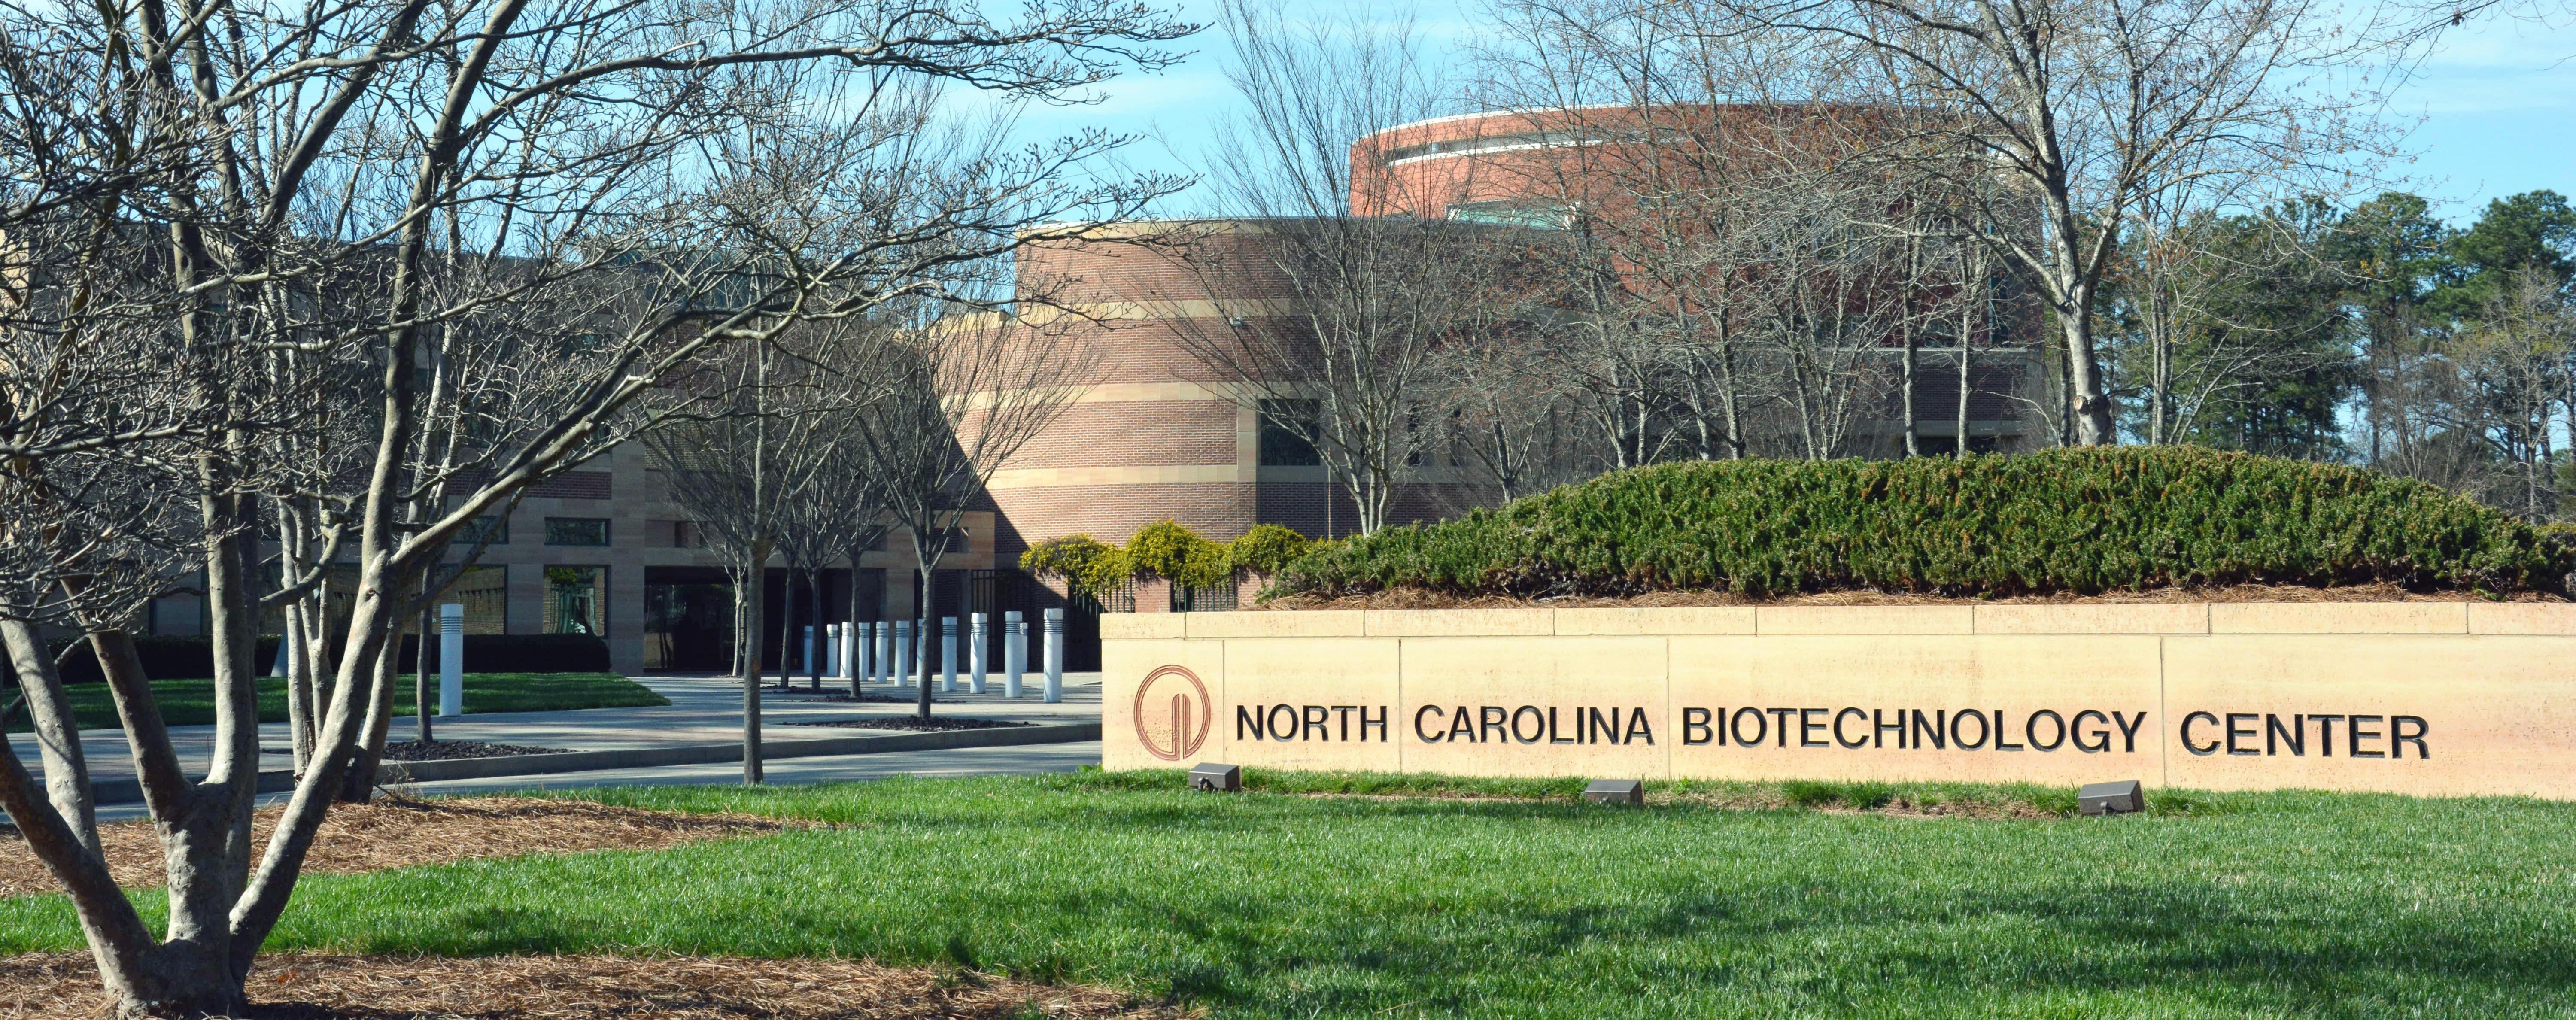 NCBiotech front view